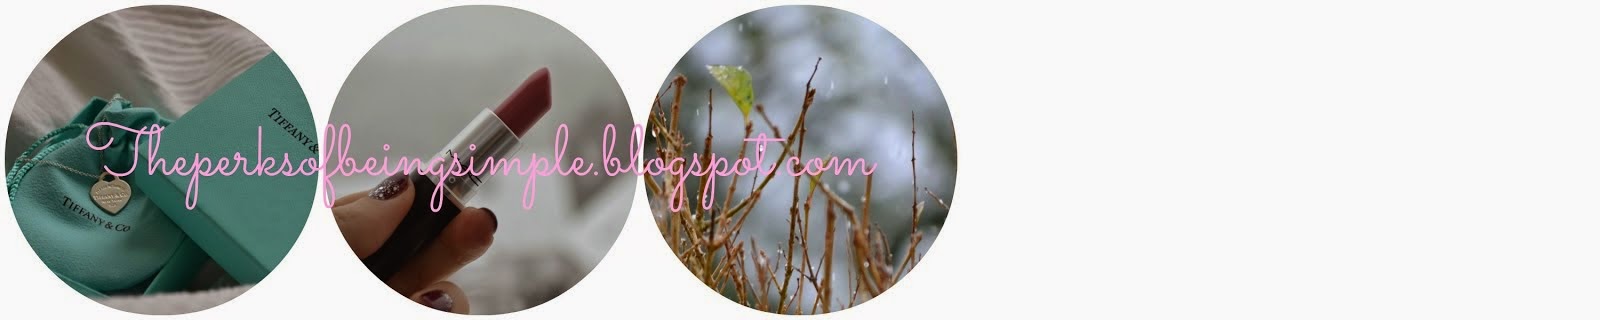 Just a simple blog!